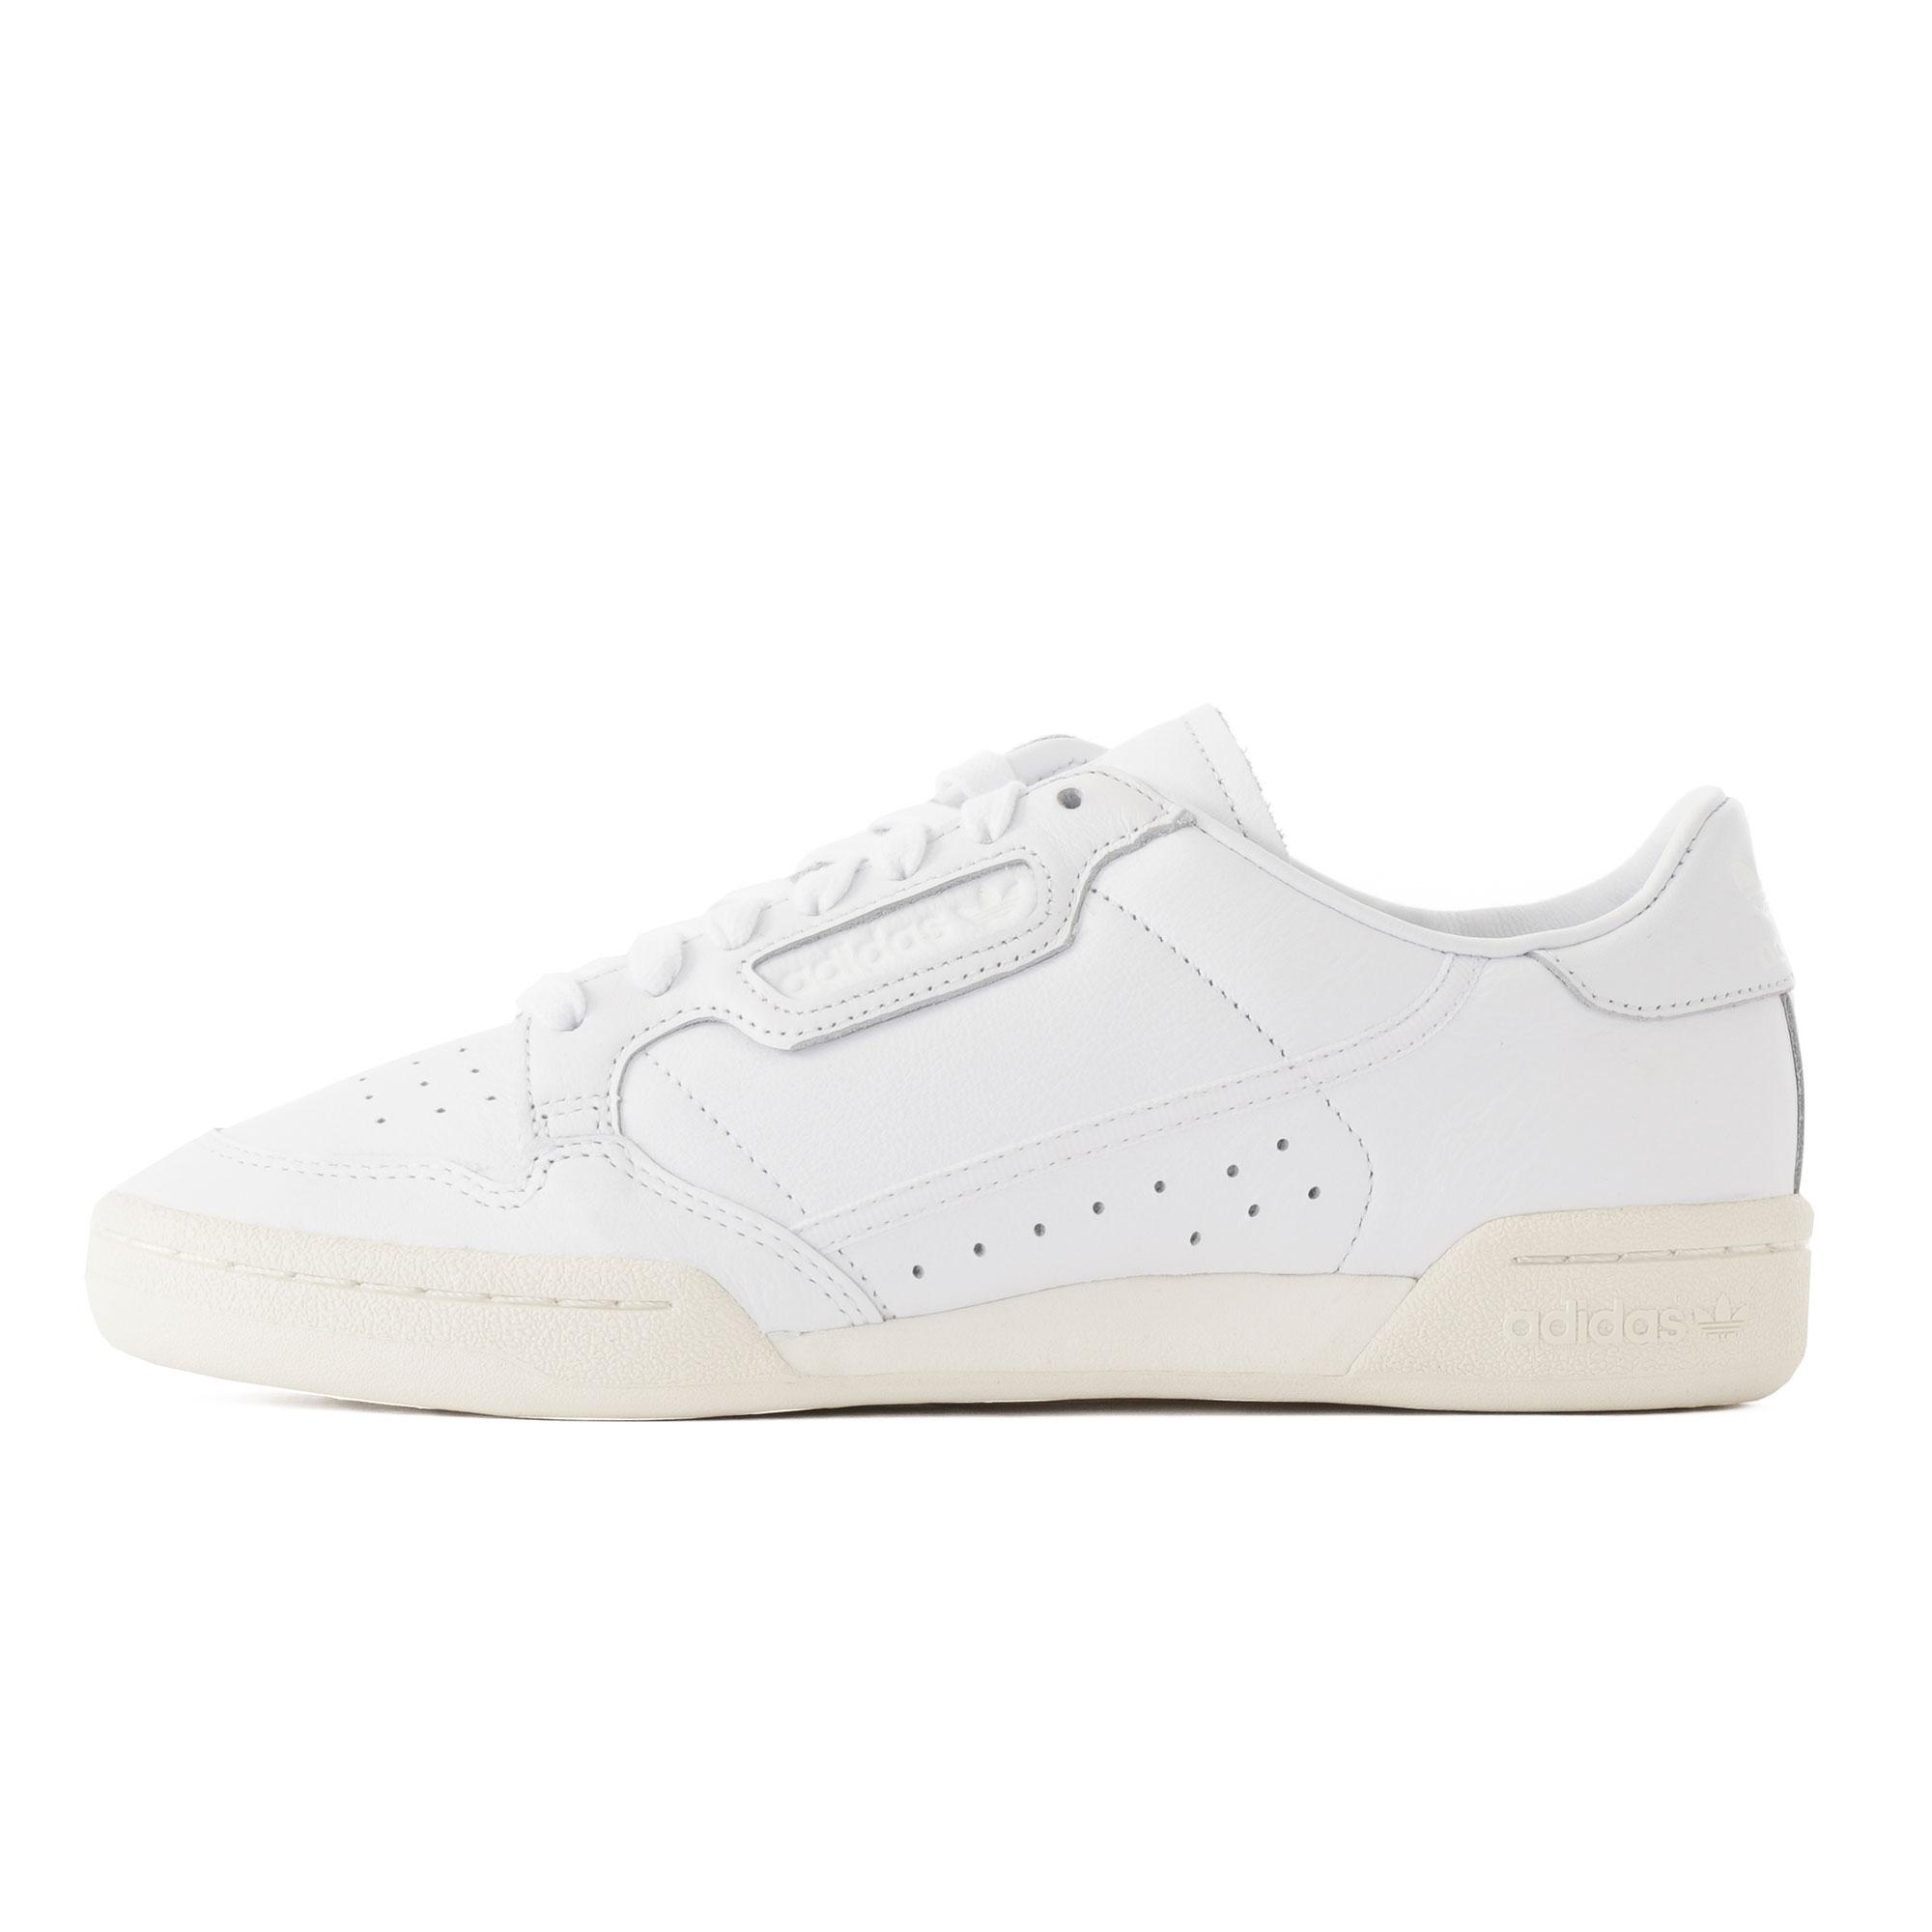 adidas Originals Continental 80 - Ftw White & Off White in White for ...